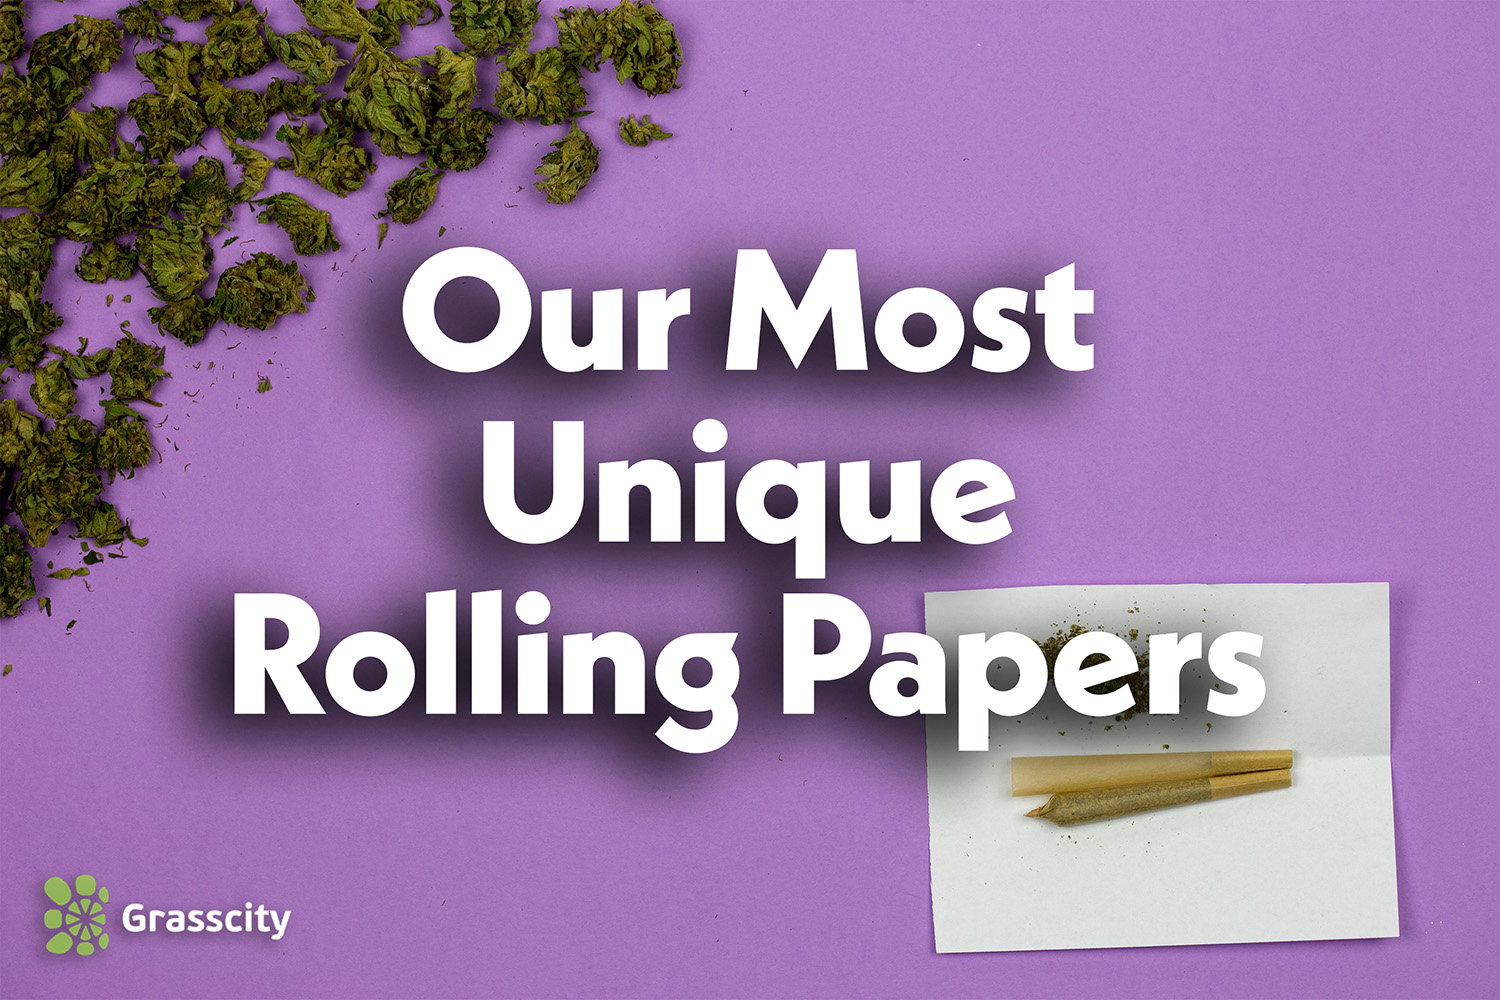 The Most Unique Rolling Papers